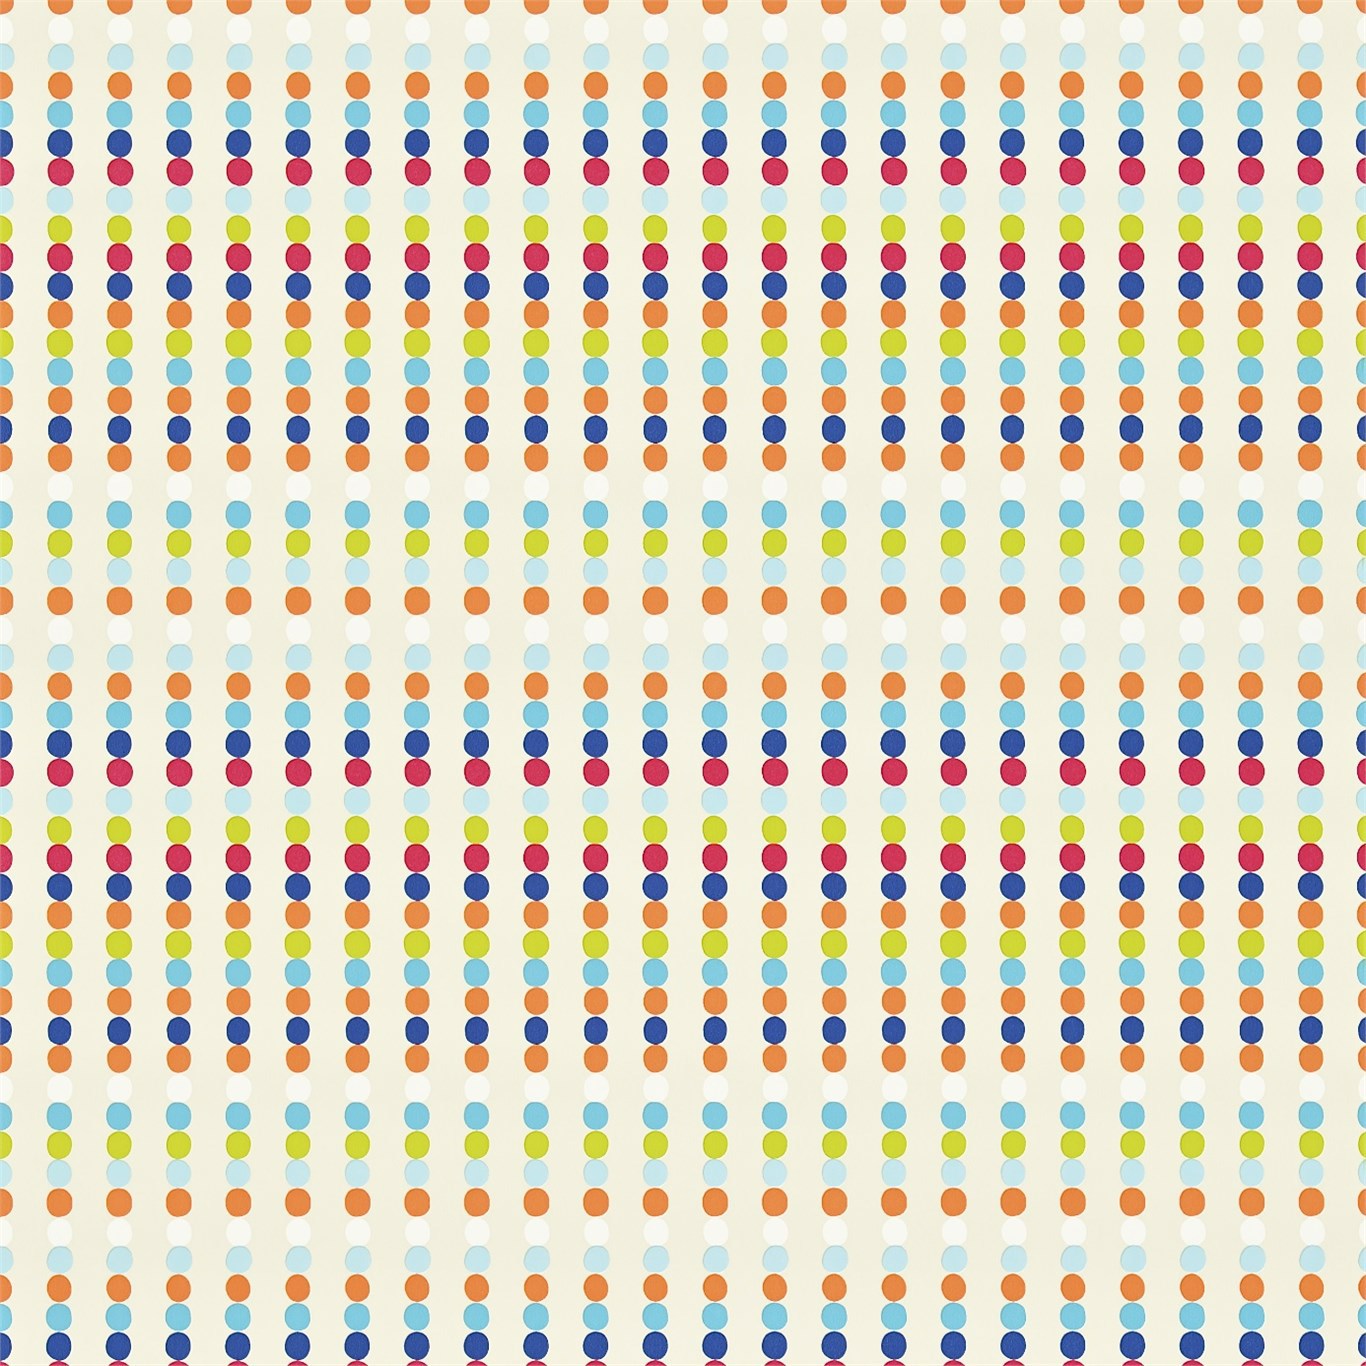 Abacus Wallpaper by Harlequin